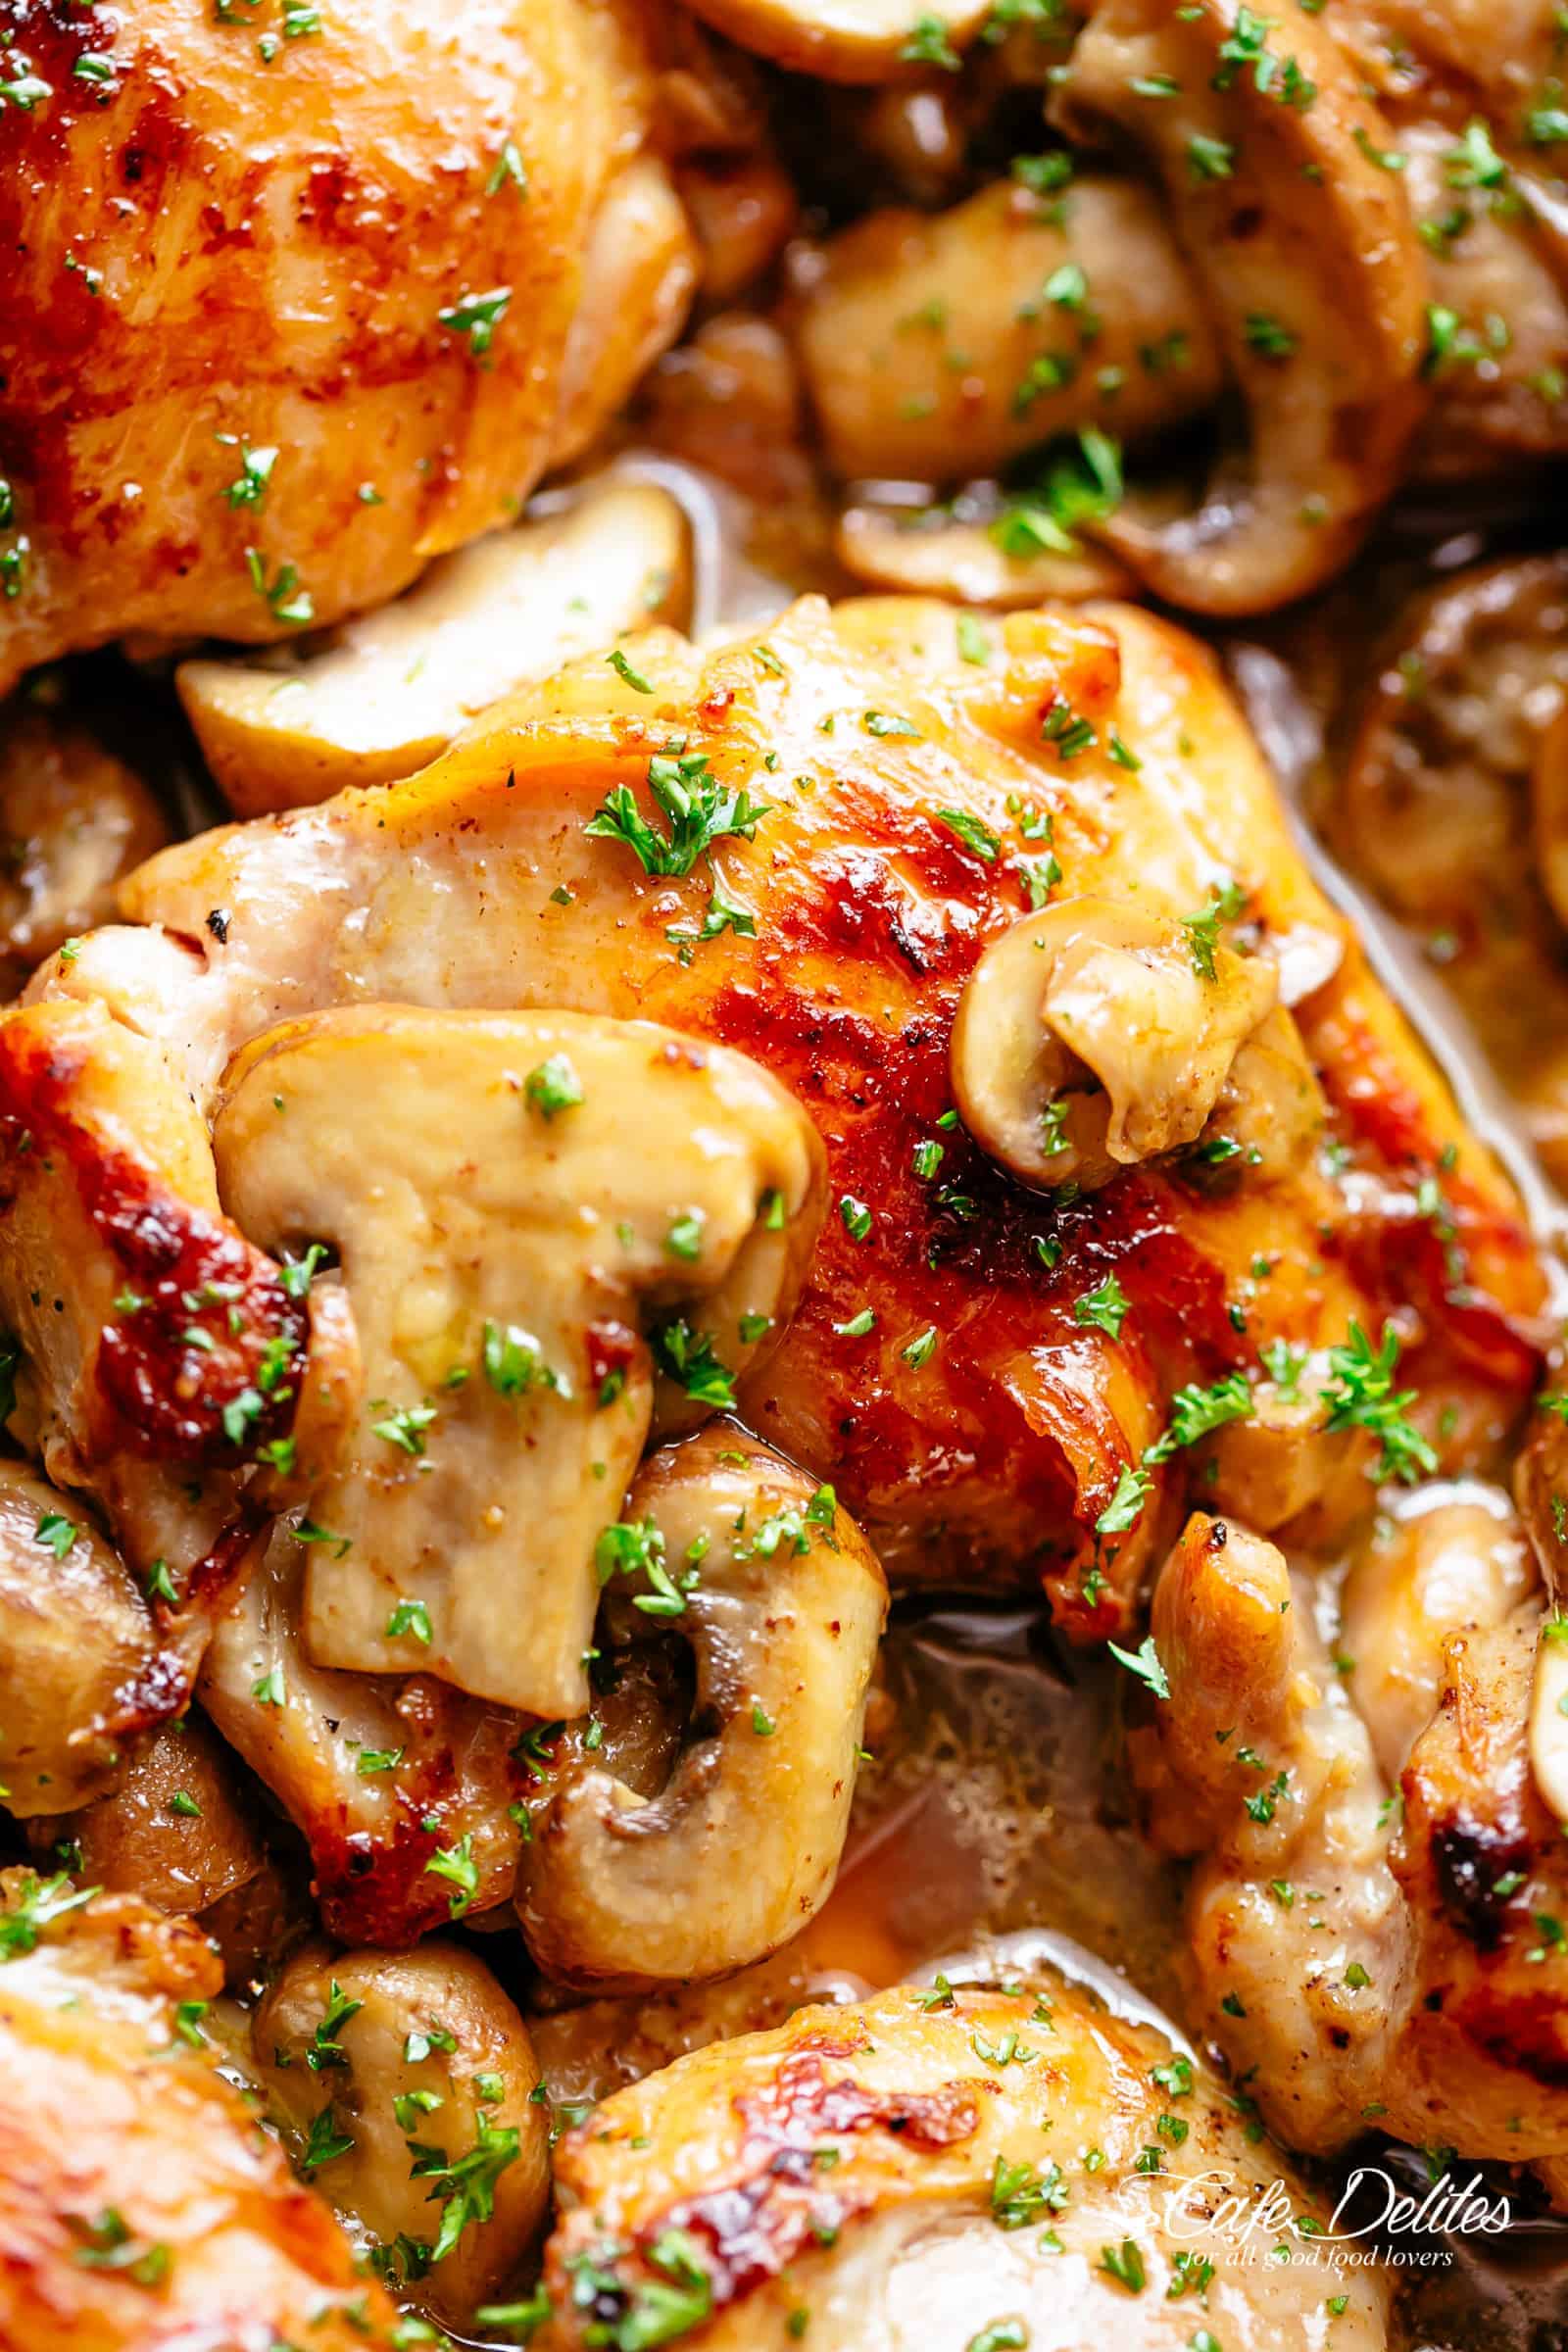 Golden seared Garlic Mushroom Chicken Thighs in a delicious, buttery sauce with a sprinkle of herbs | cafedelites.com